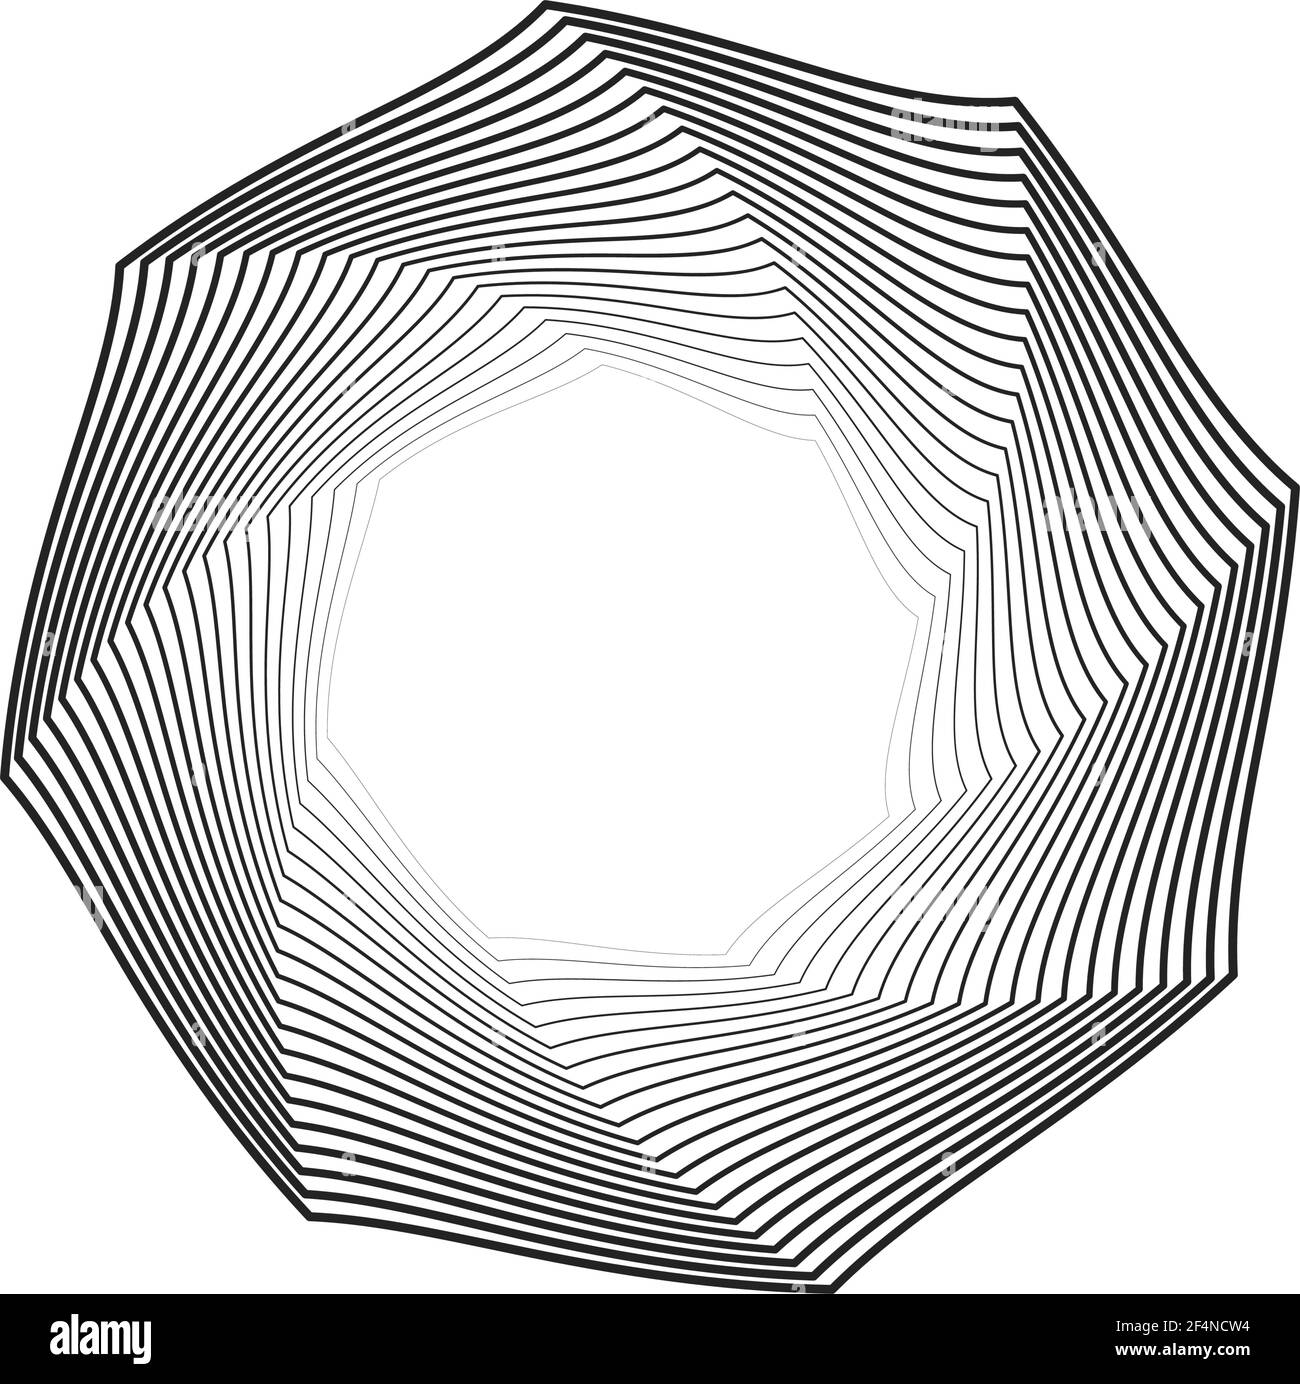 Abstract optical pattern. Octagonal geometric shape with halftone effect. Vector element for your design. Stock Vector